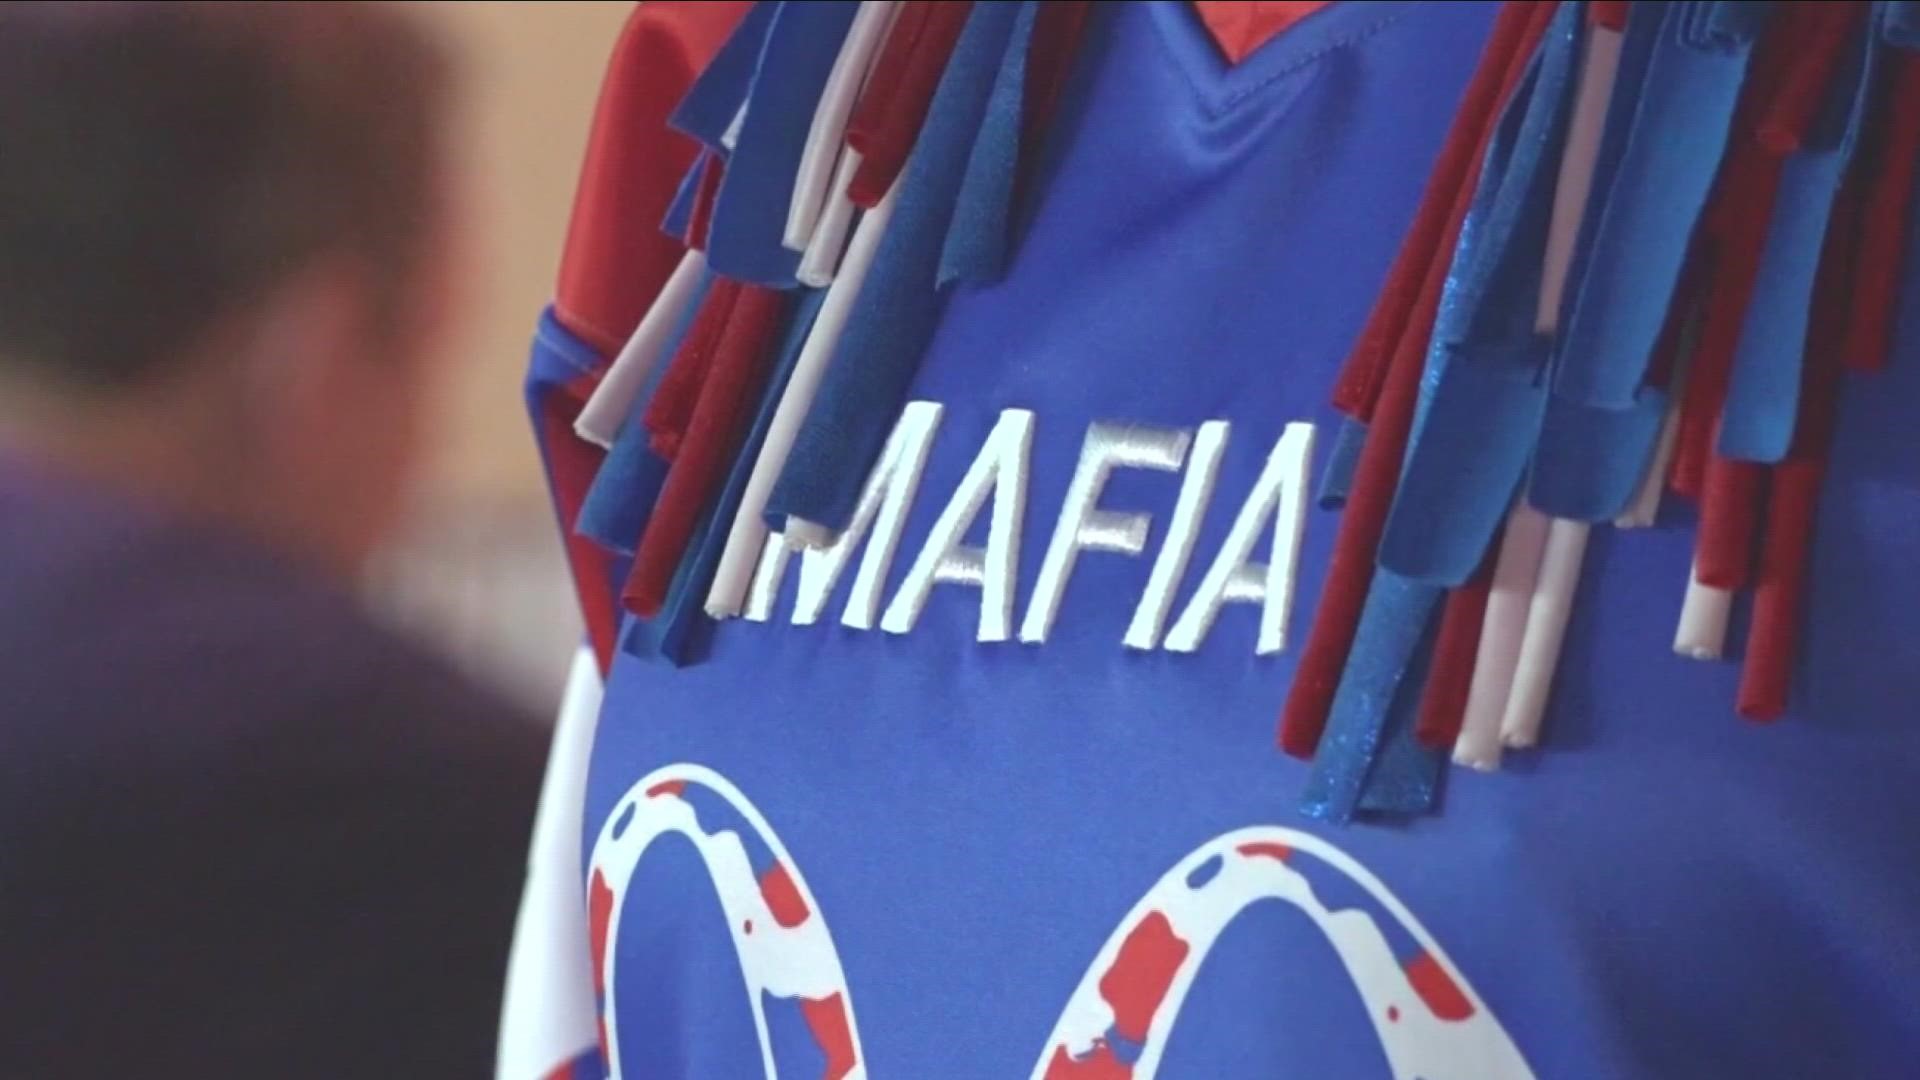 If you were on social media today you may have seen some talk about Bills Mafia. Nate Benson has more details about the conversations around trademarking the name.